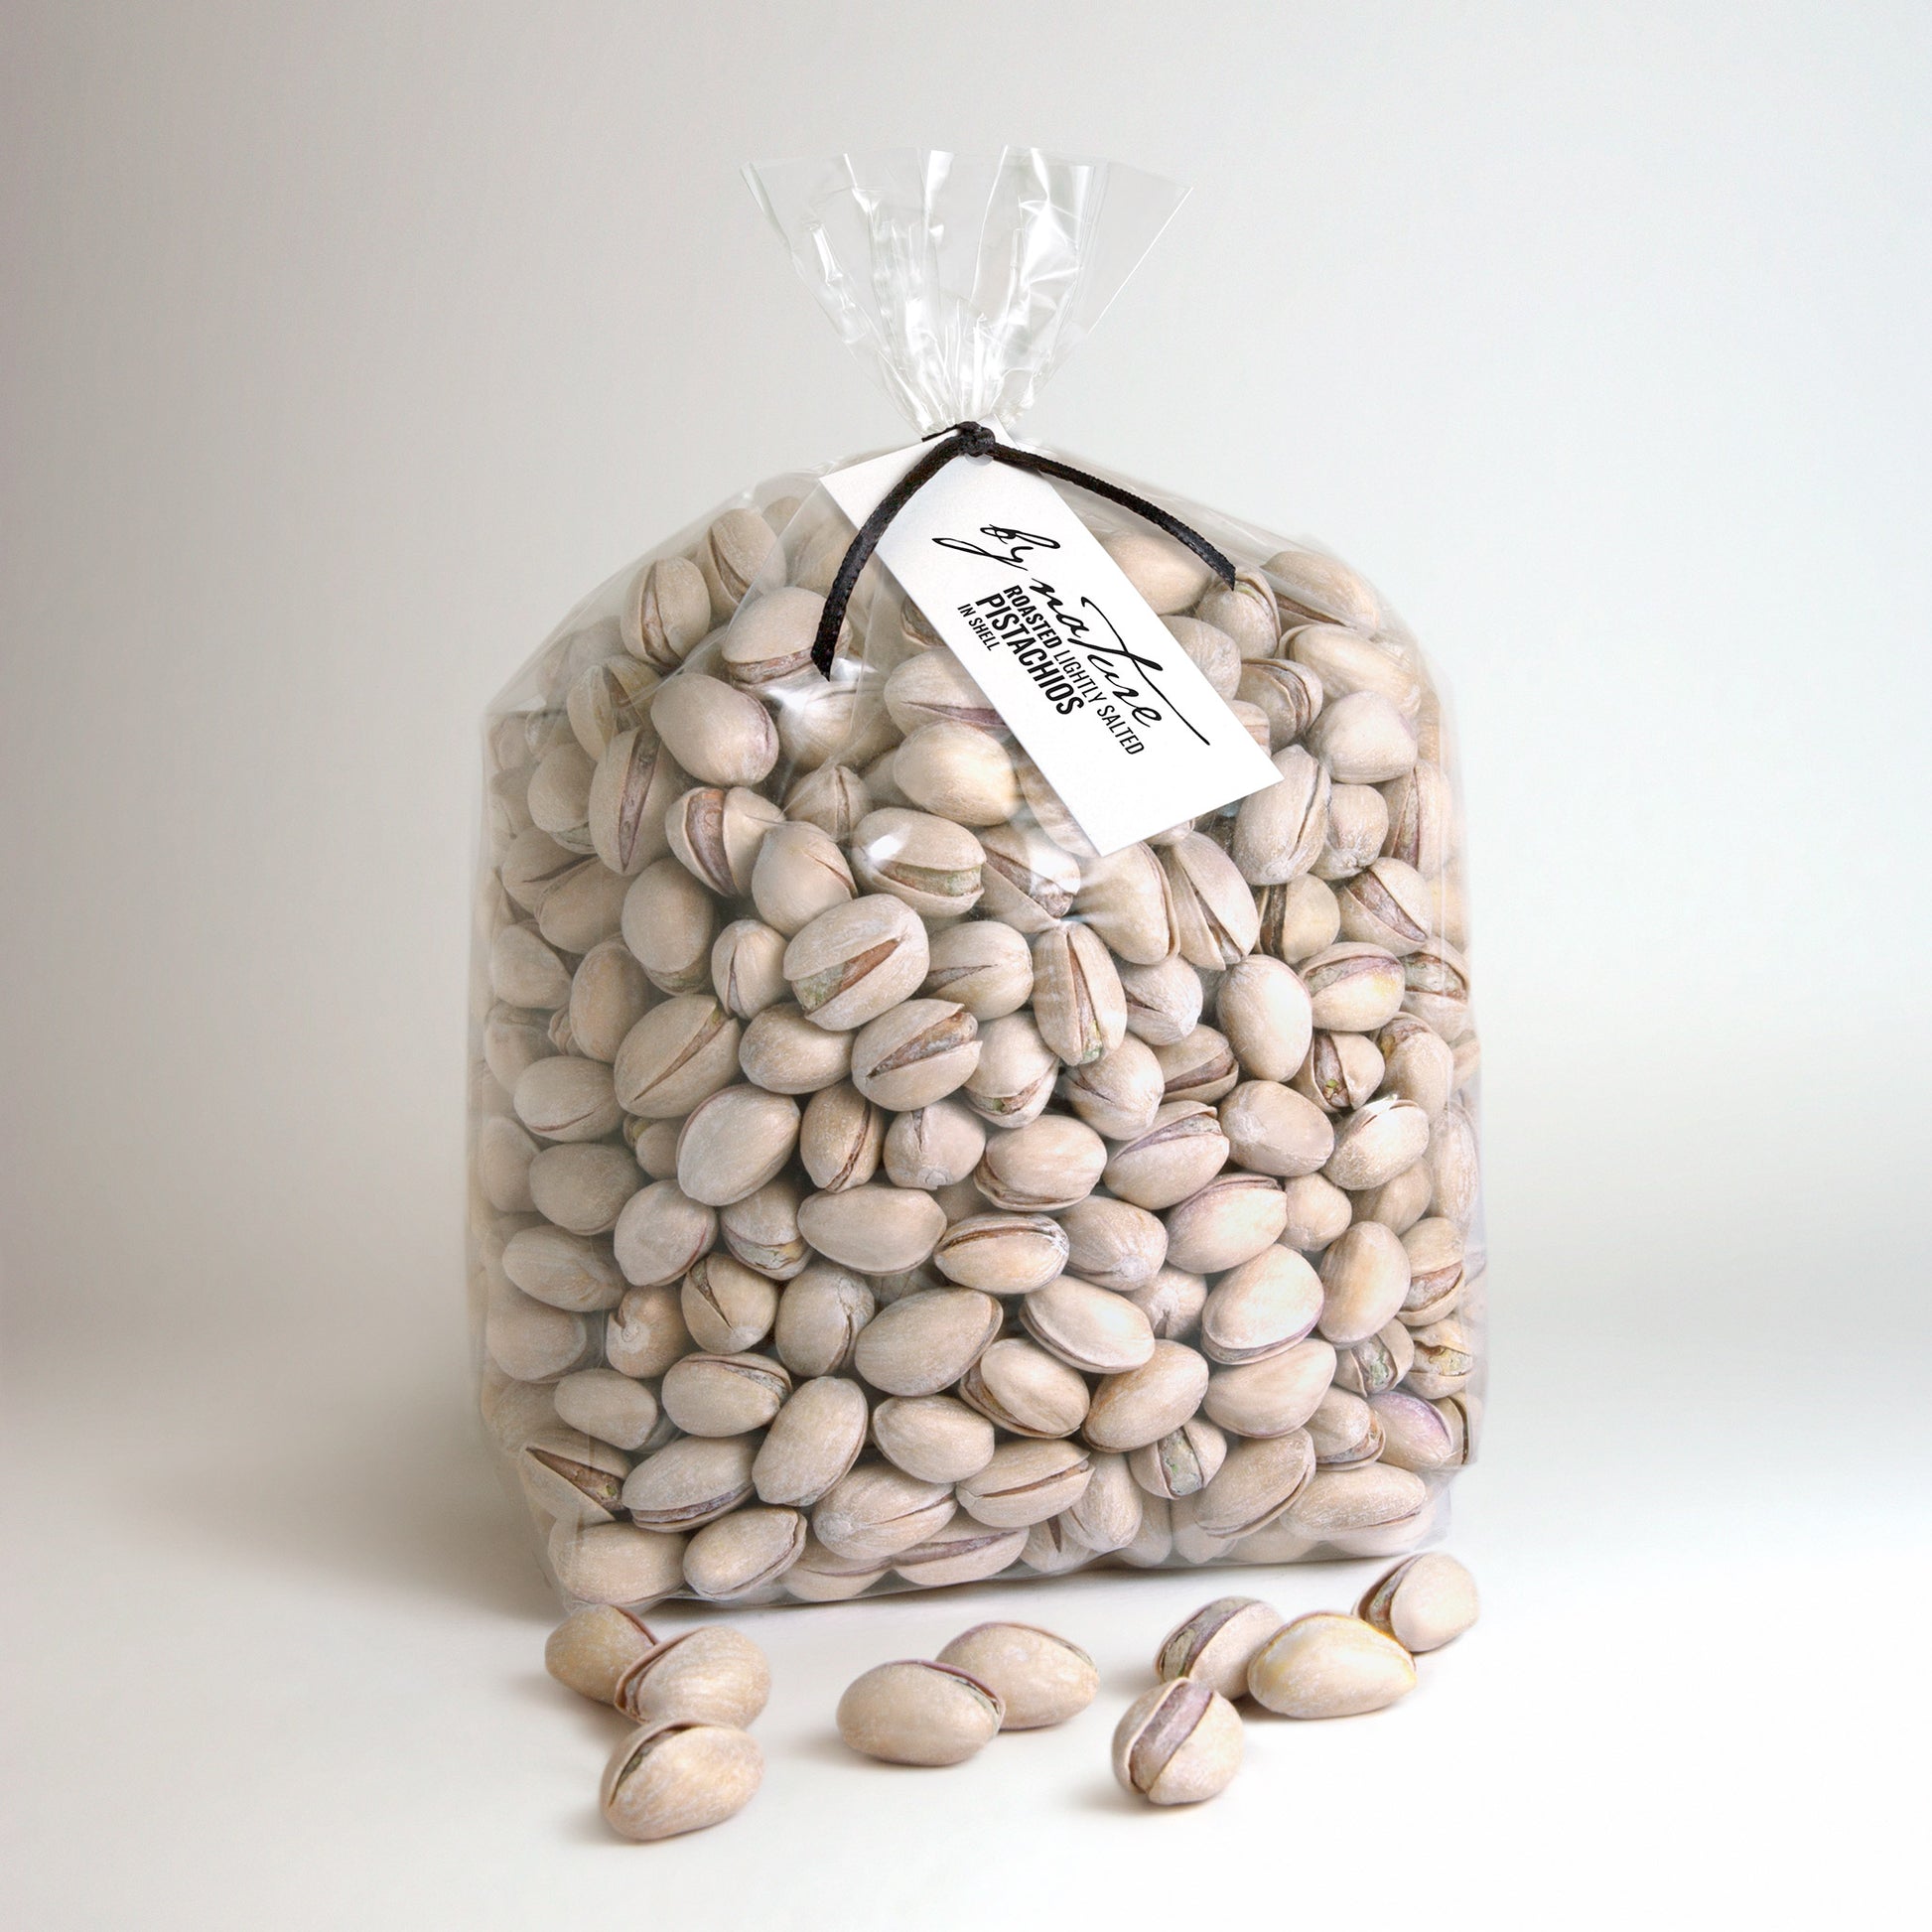 BY NATURE Pistachios in Shell, 1kg - roasted, lightly salted.